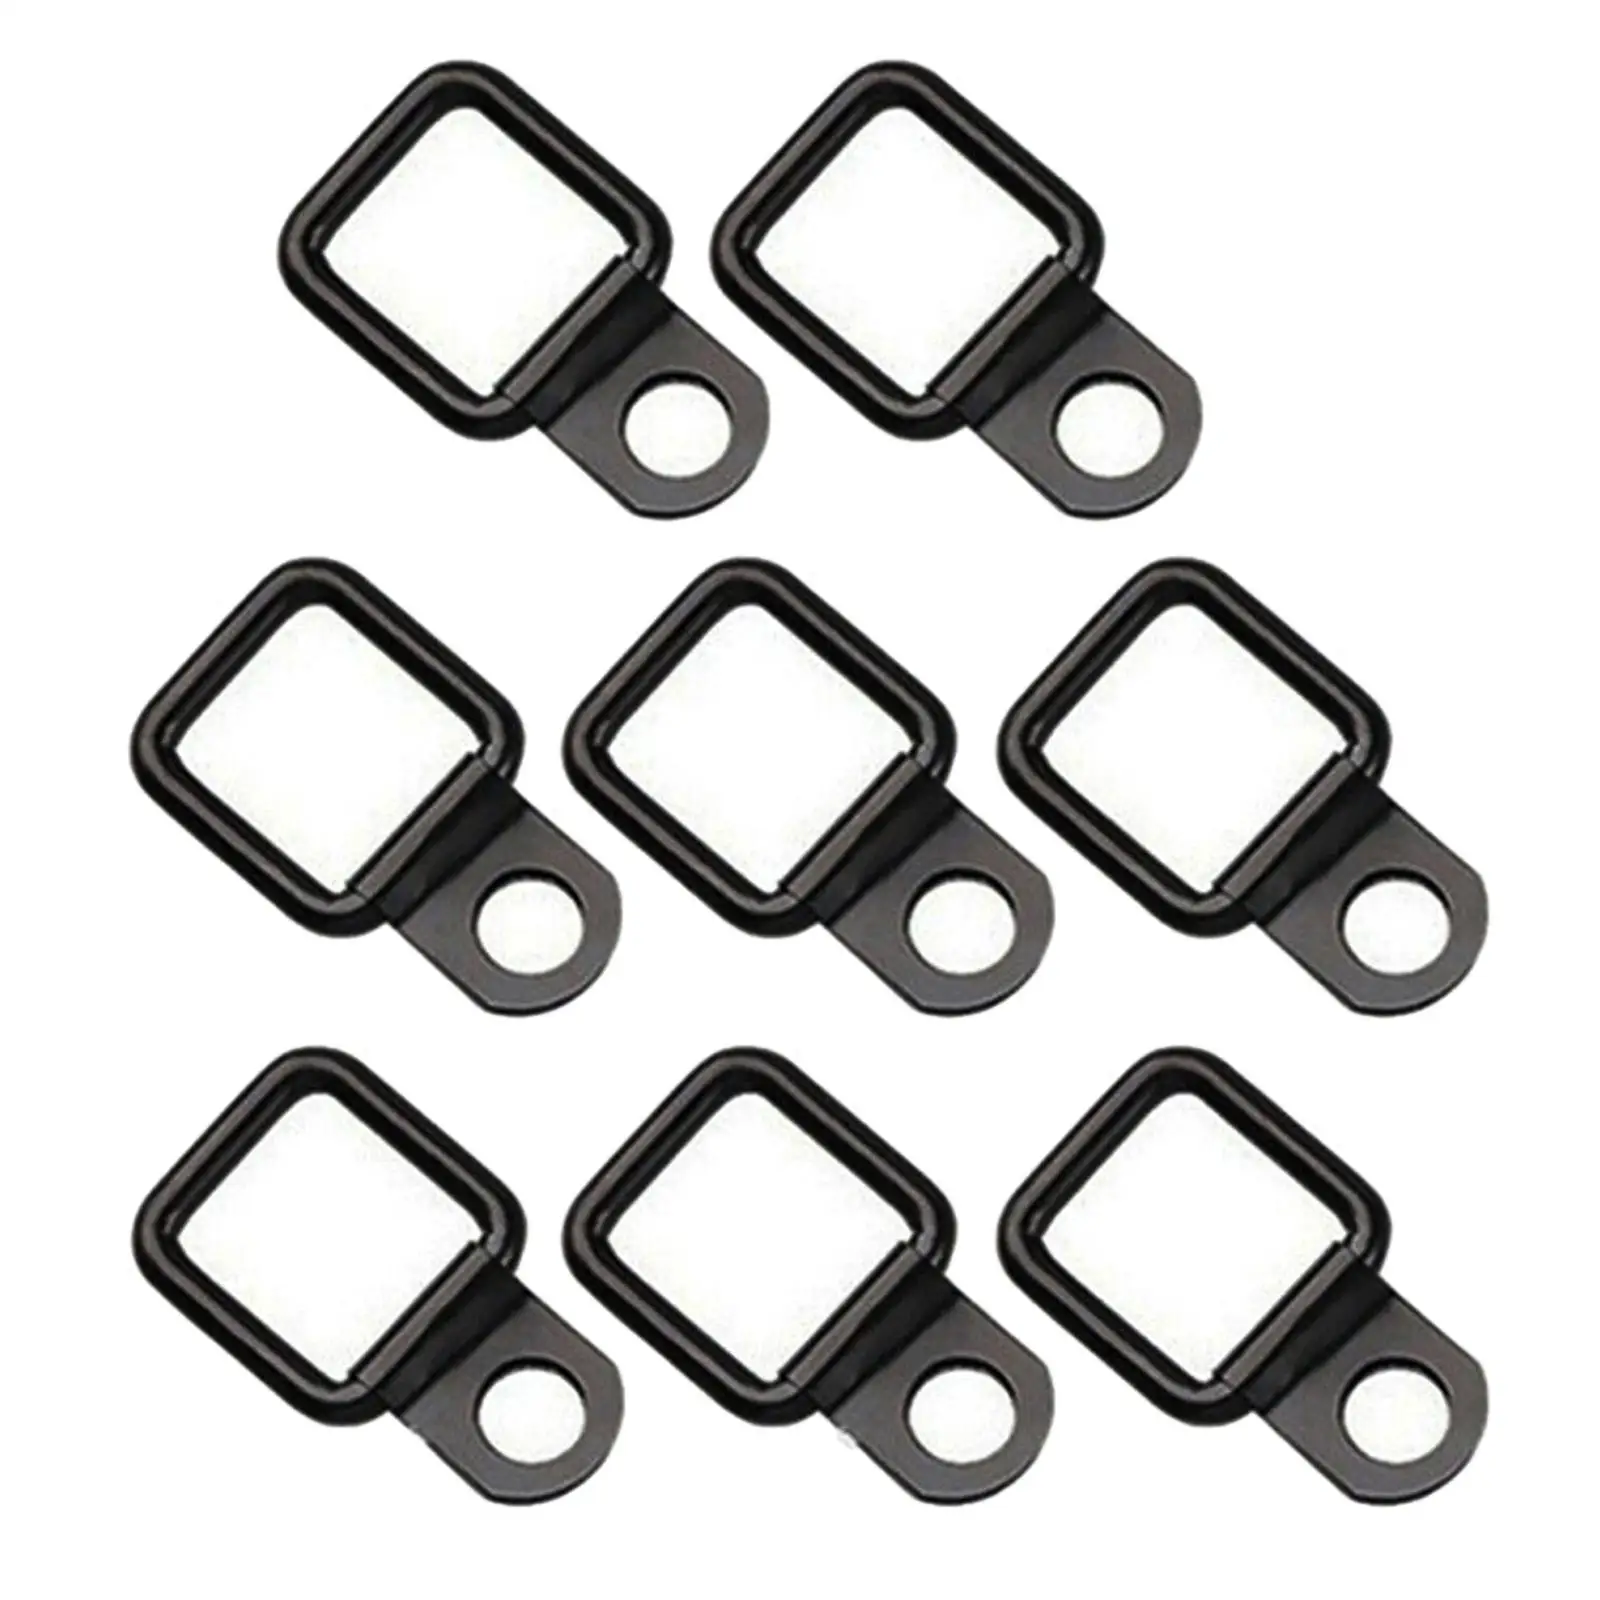 8x Fixing Point Anchor Quick Release Tie Down Rings Bolts Fits for Truck Car